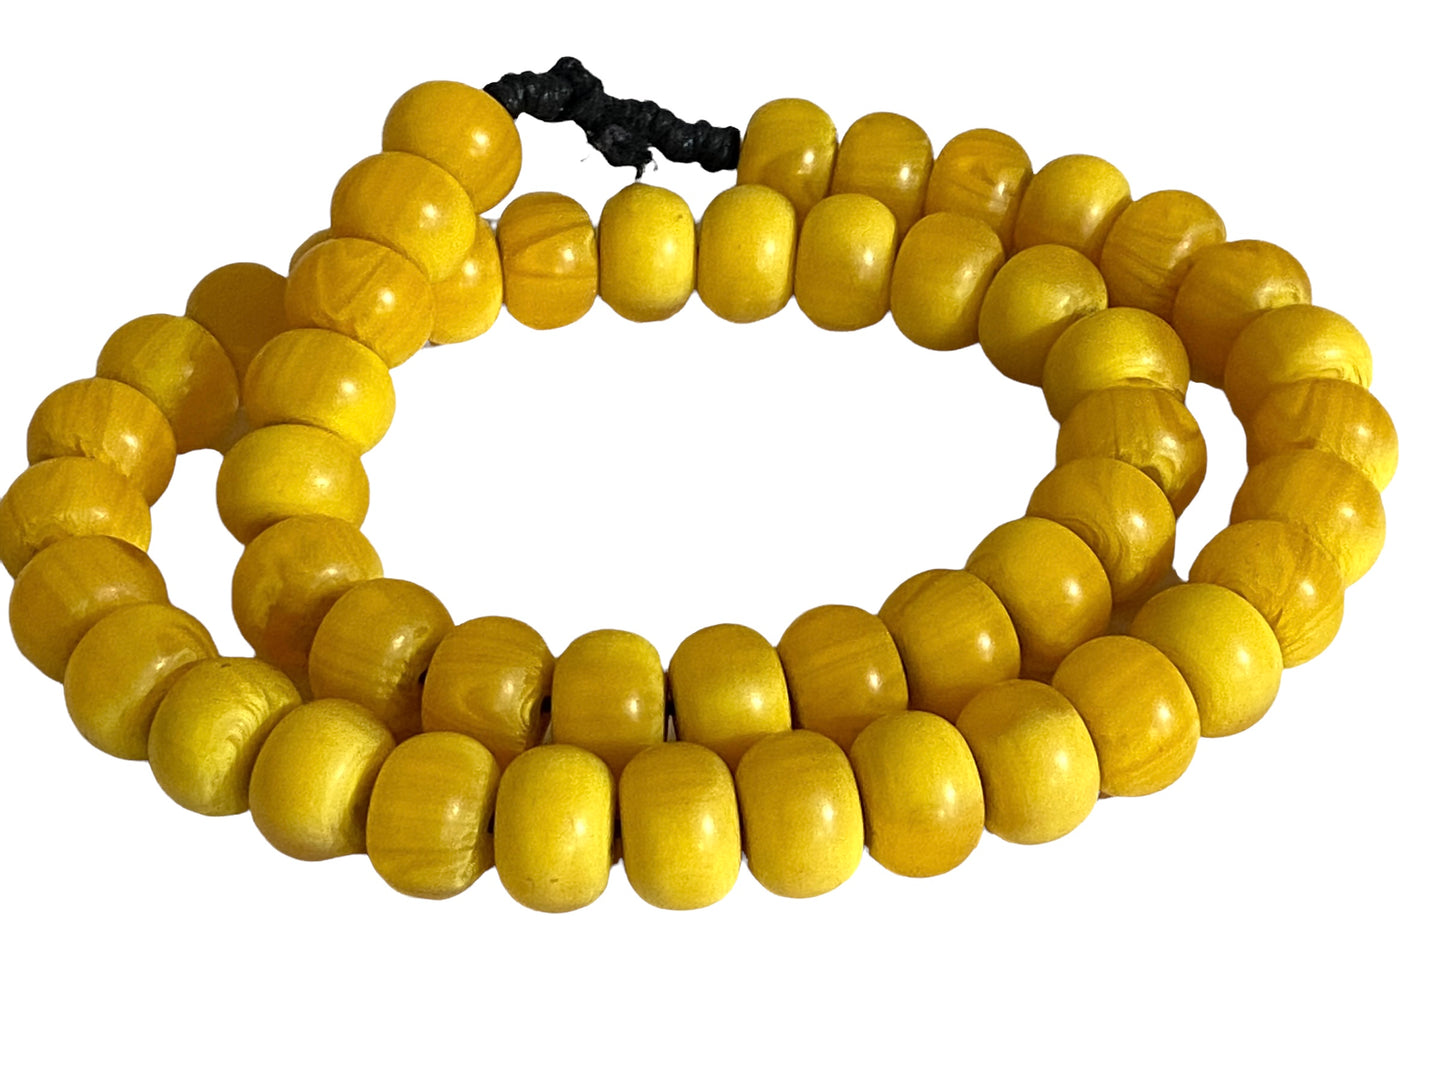 #4558 Vintage African Simulated Copal Amber Necklace W/ 50 Trade Beads